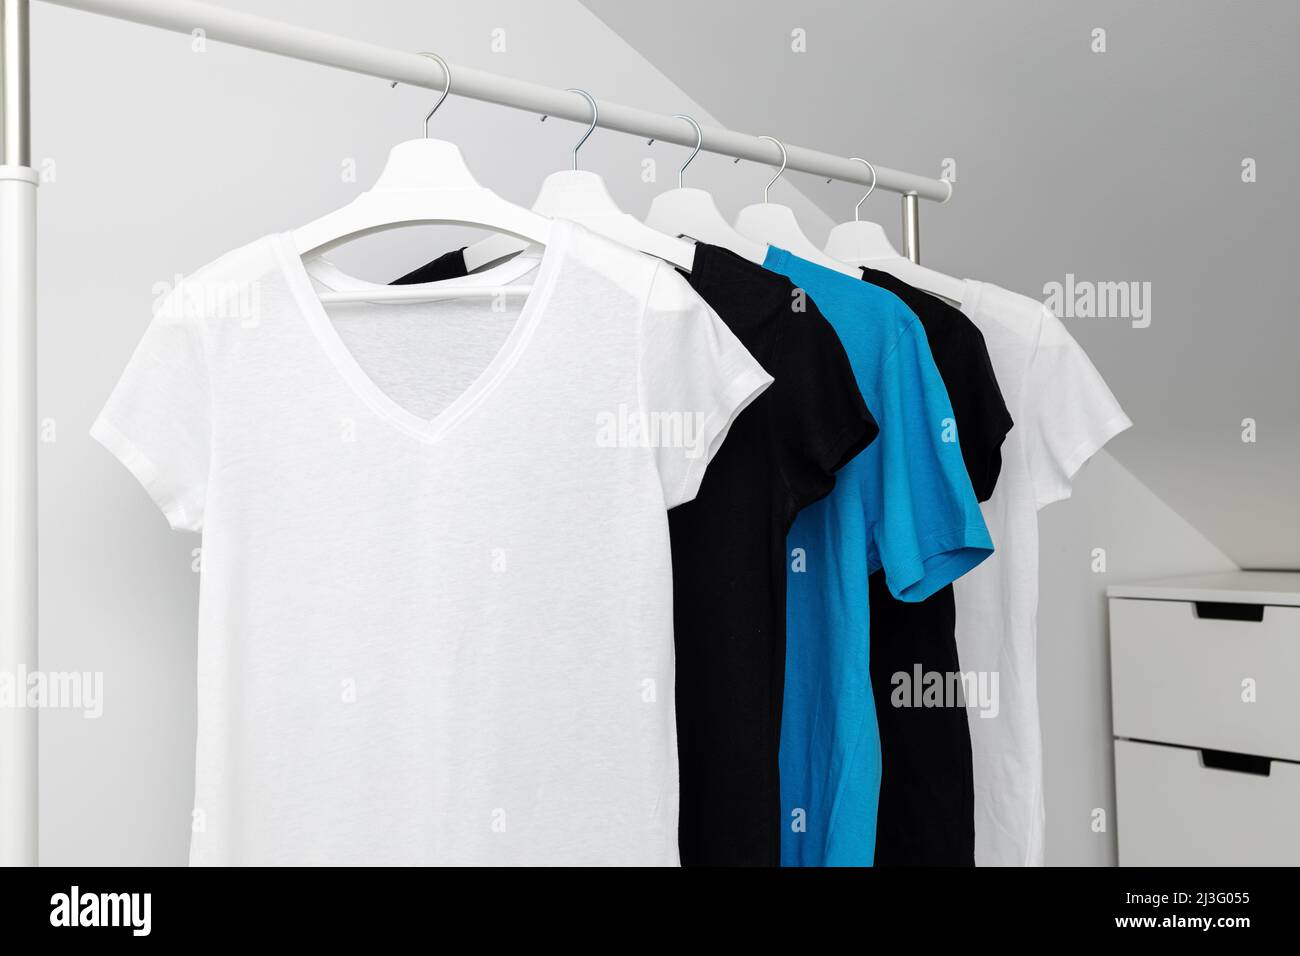 Group of Assorted t-shirts hanging on white hangers. Clothing rack. Template, mock up. Stock Photo